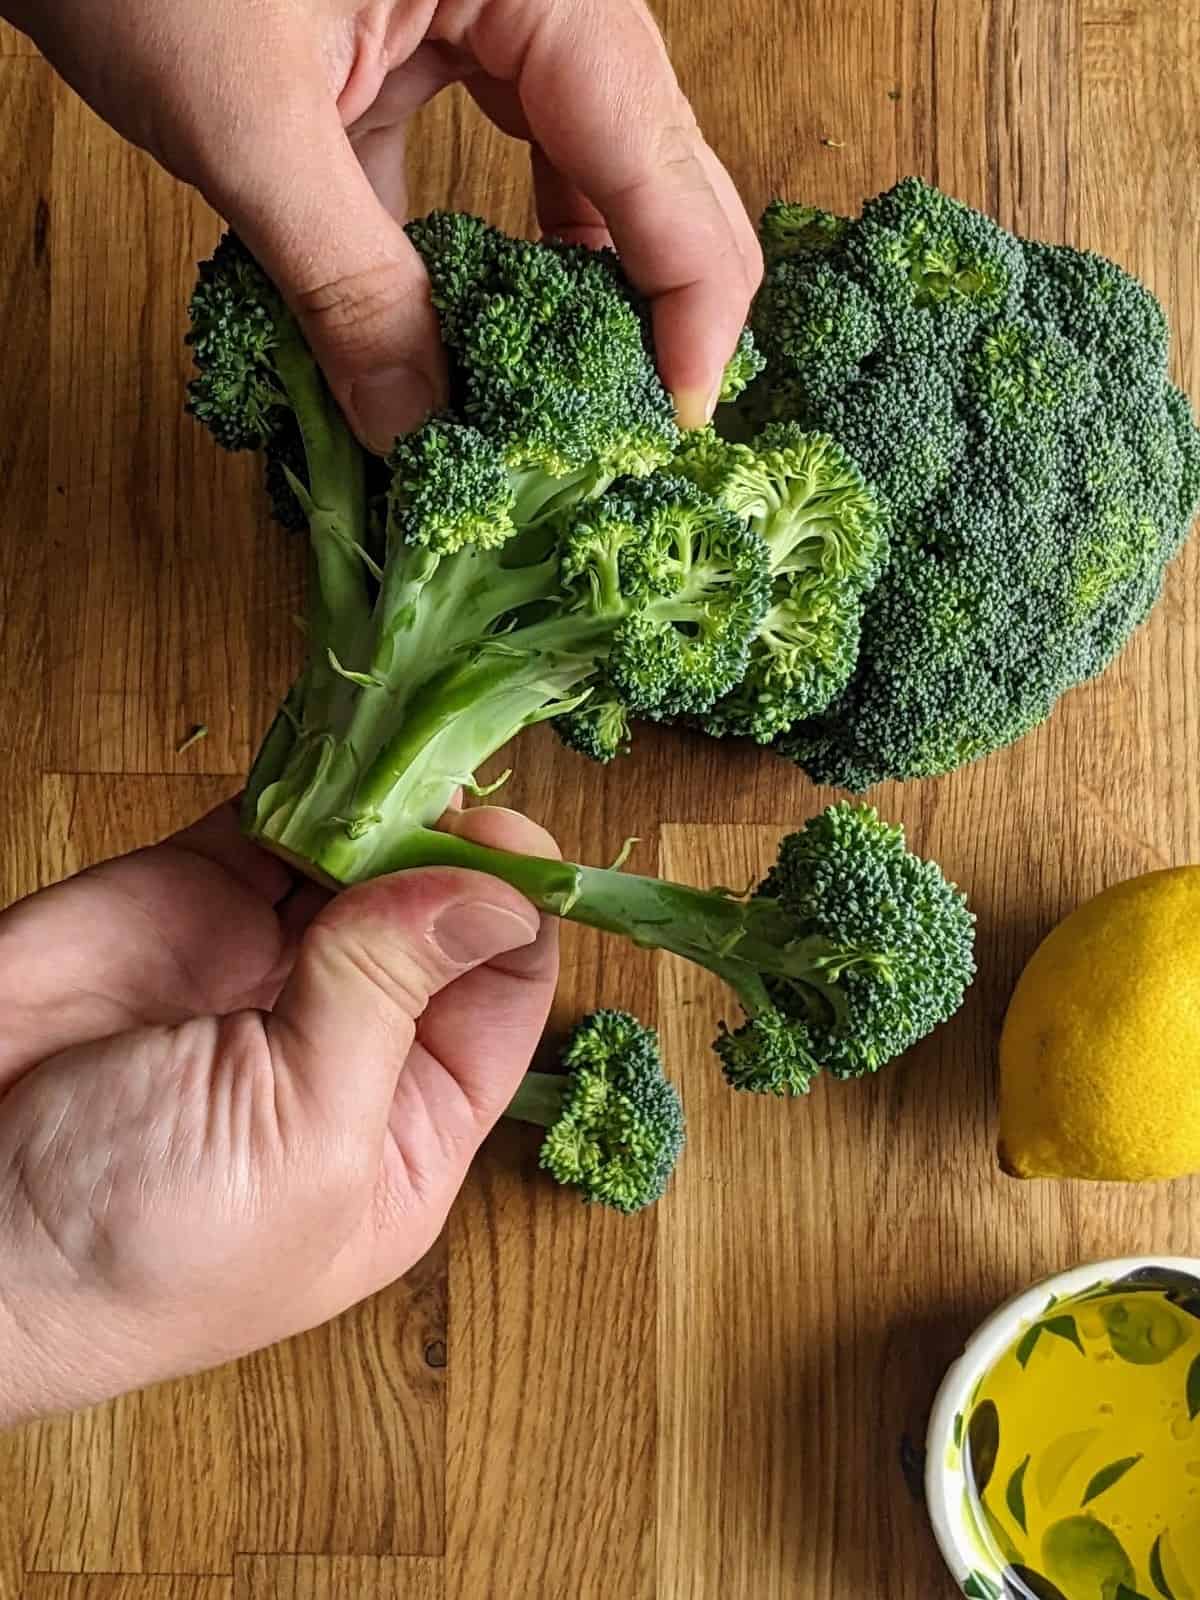 How to separate broccoli florets from stem.